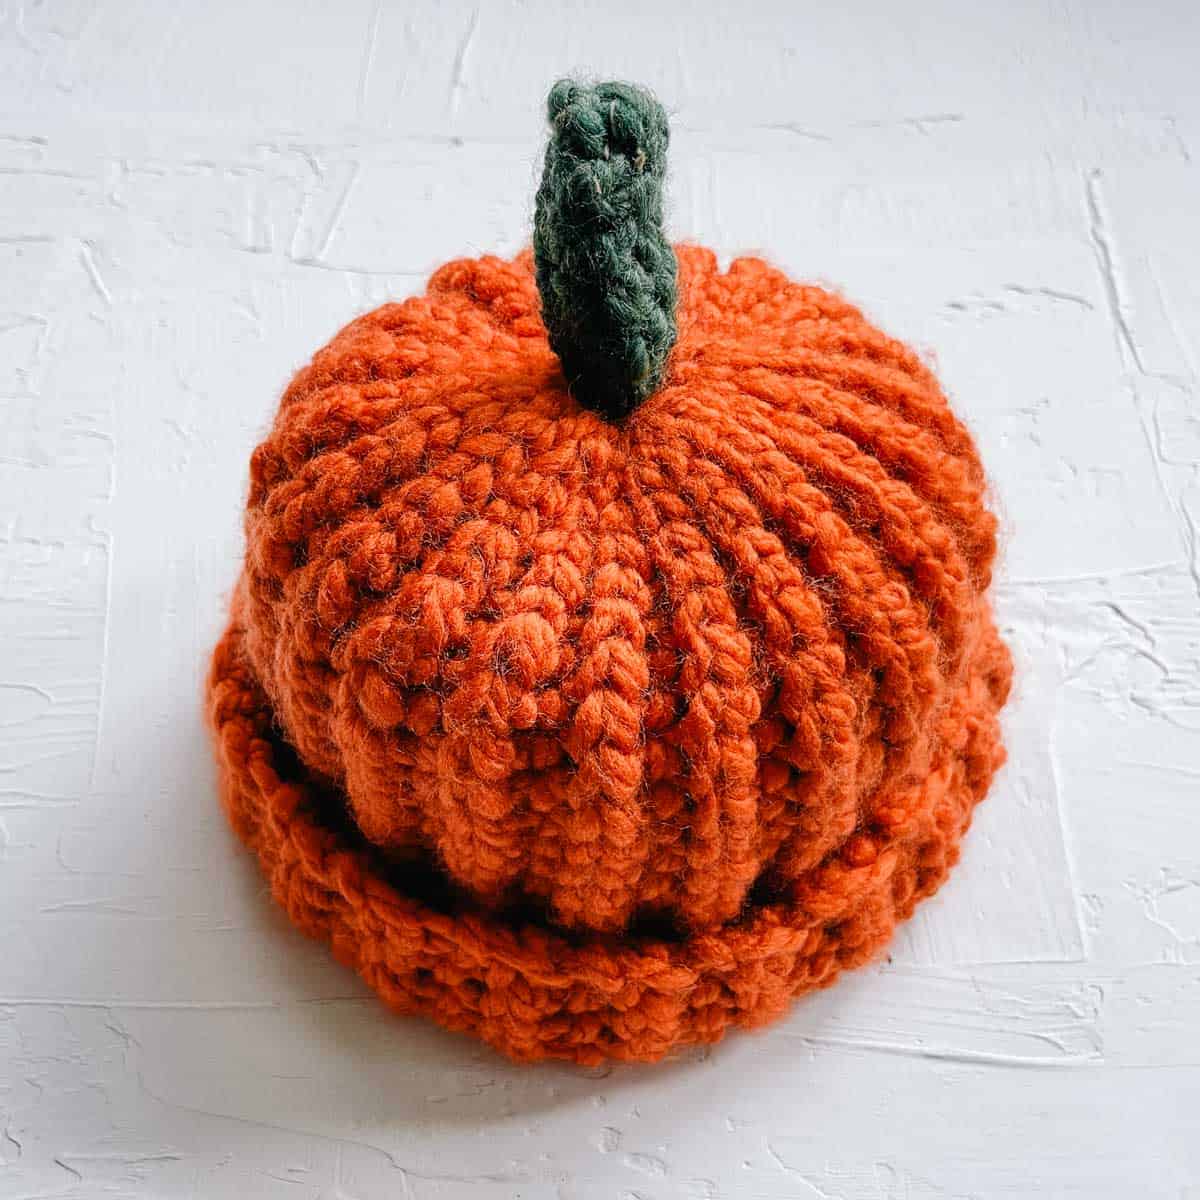 Ribbed crochet pumpkin hat for adults.